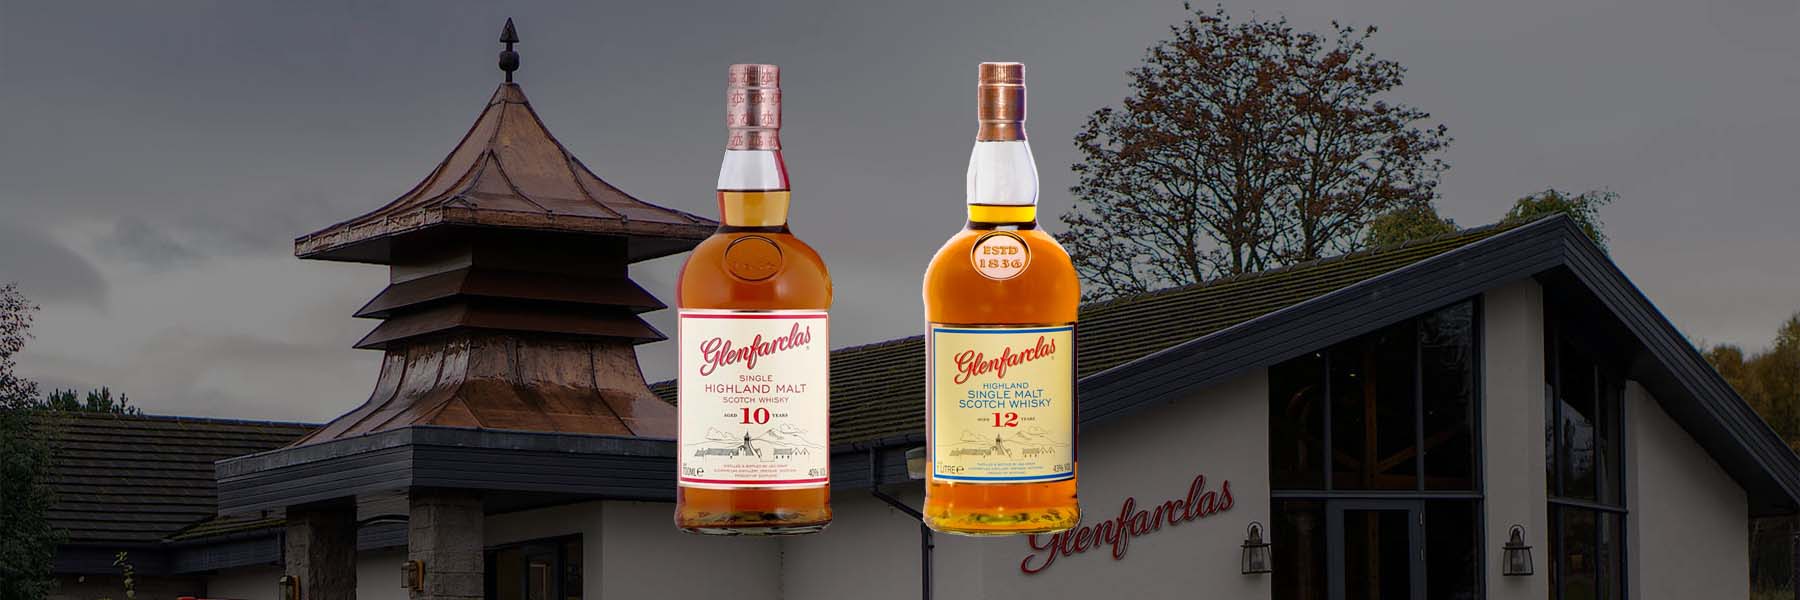 Glenfarclas 10 vs 12 Whisky: Which is the Better Choice?